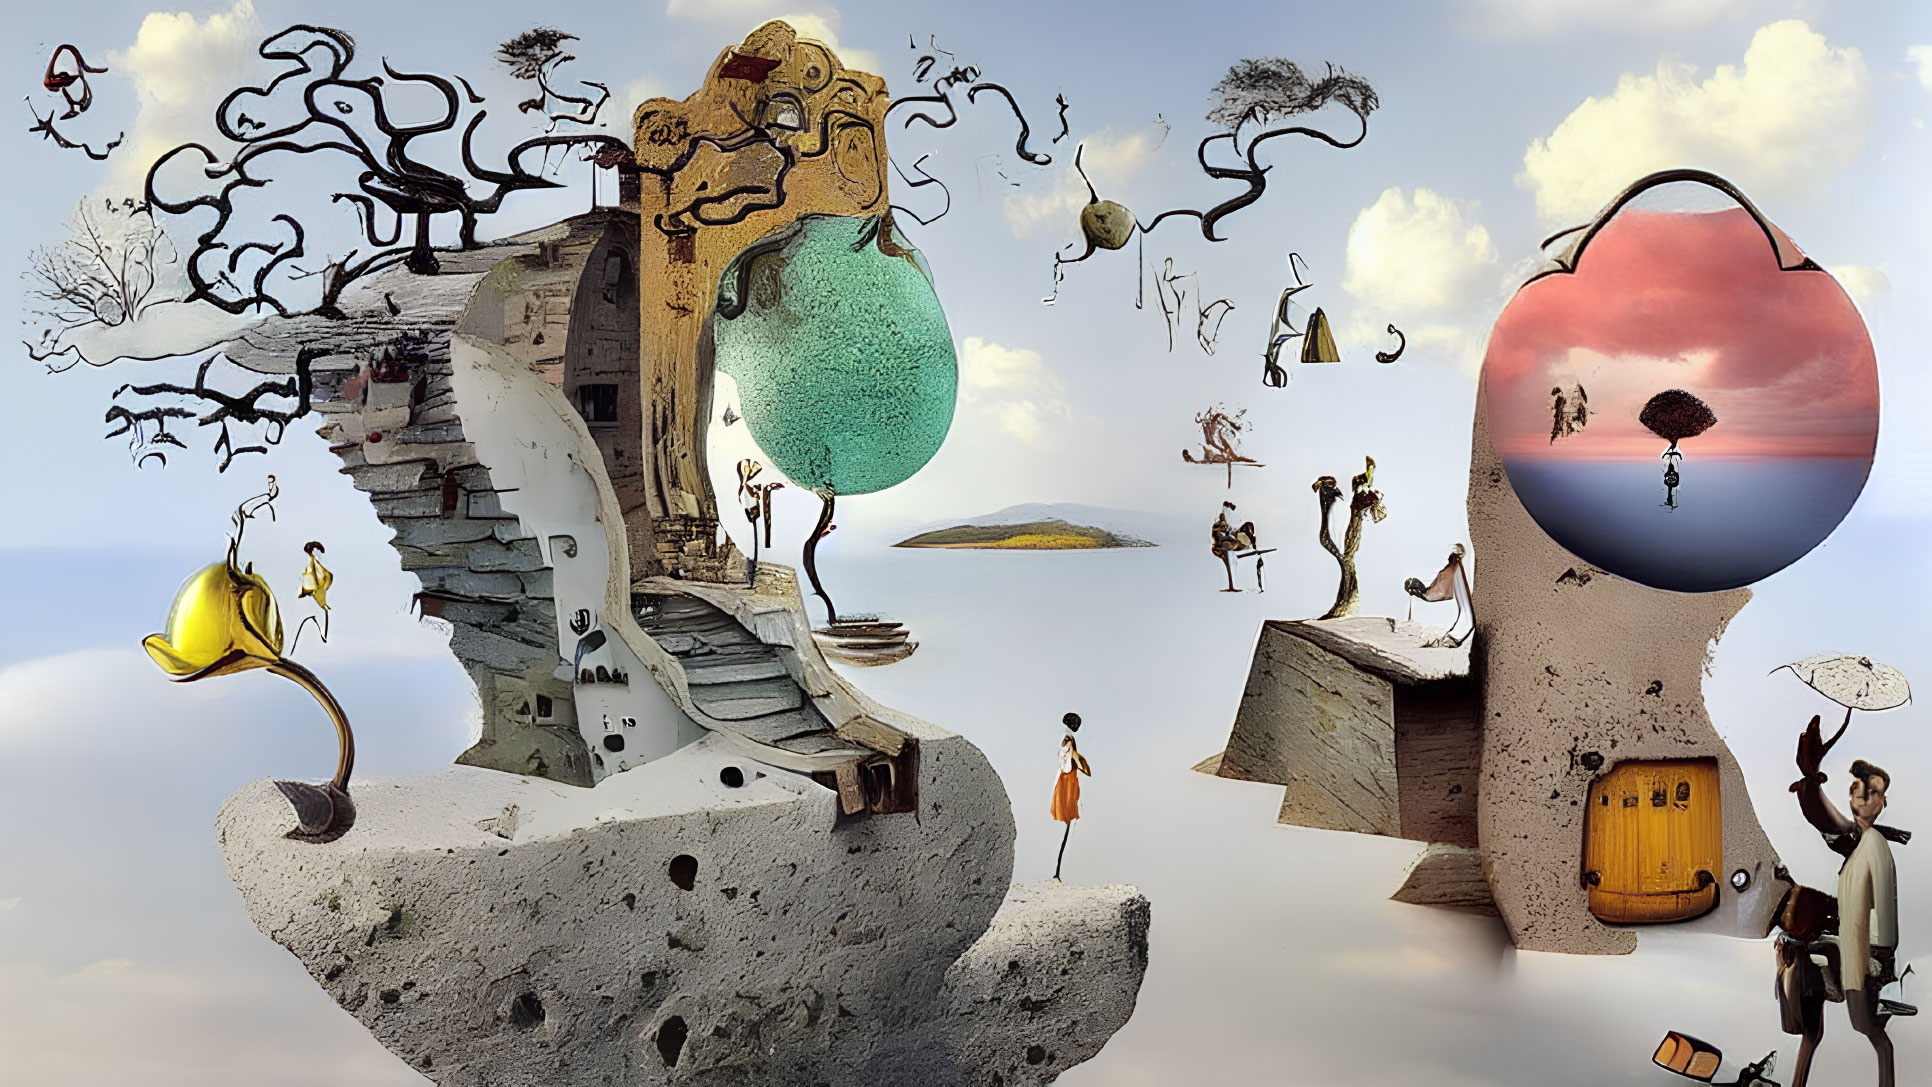 Surreal Landscape with Floating Islands and Whimsical Characters